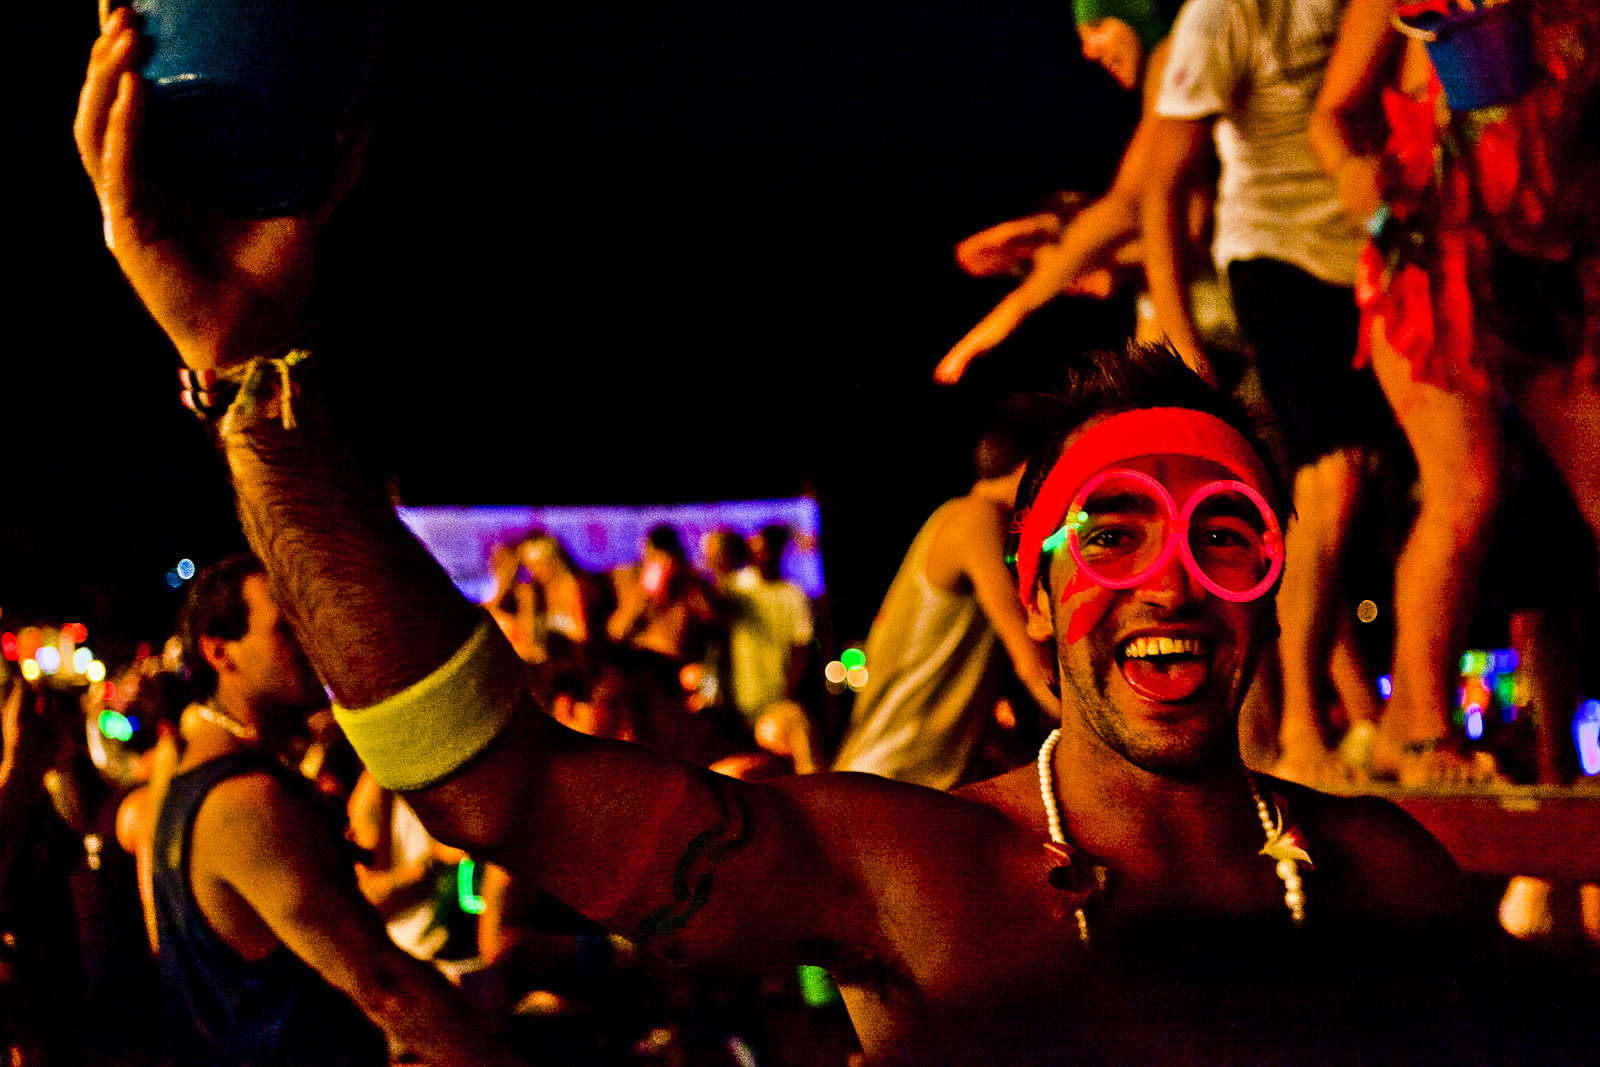 a man with pink eye patch smiling at a music festival